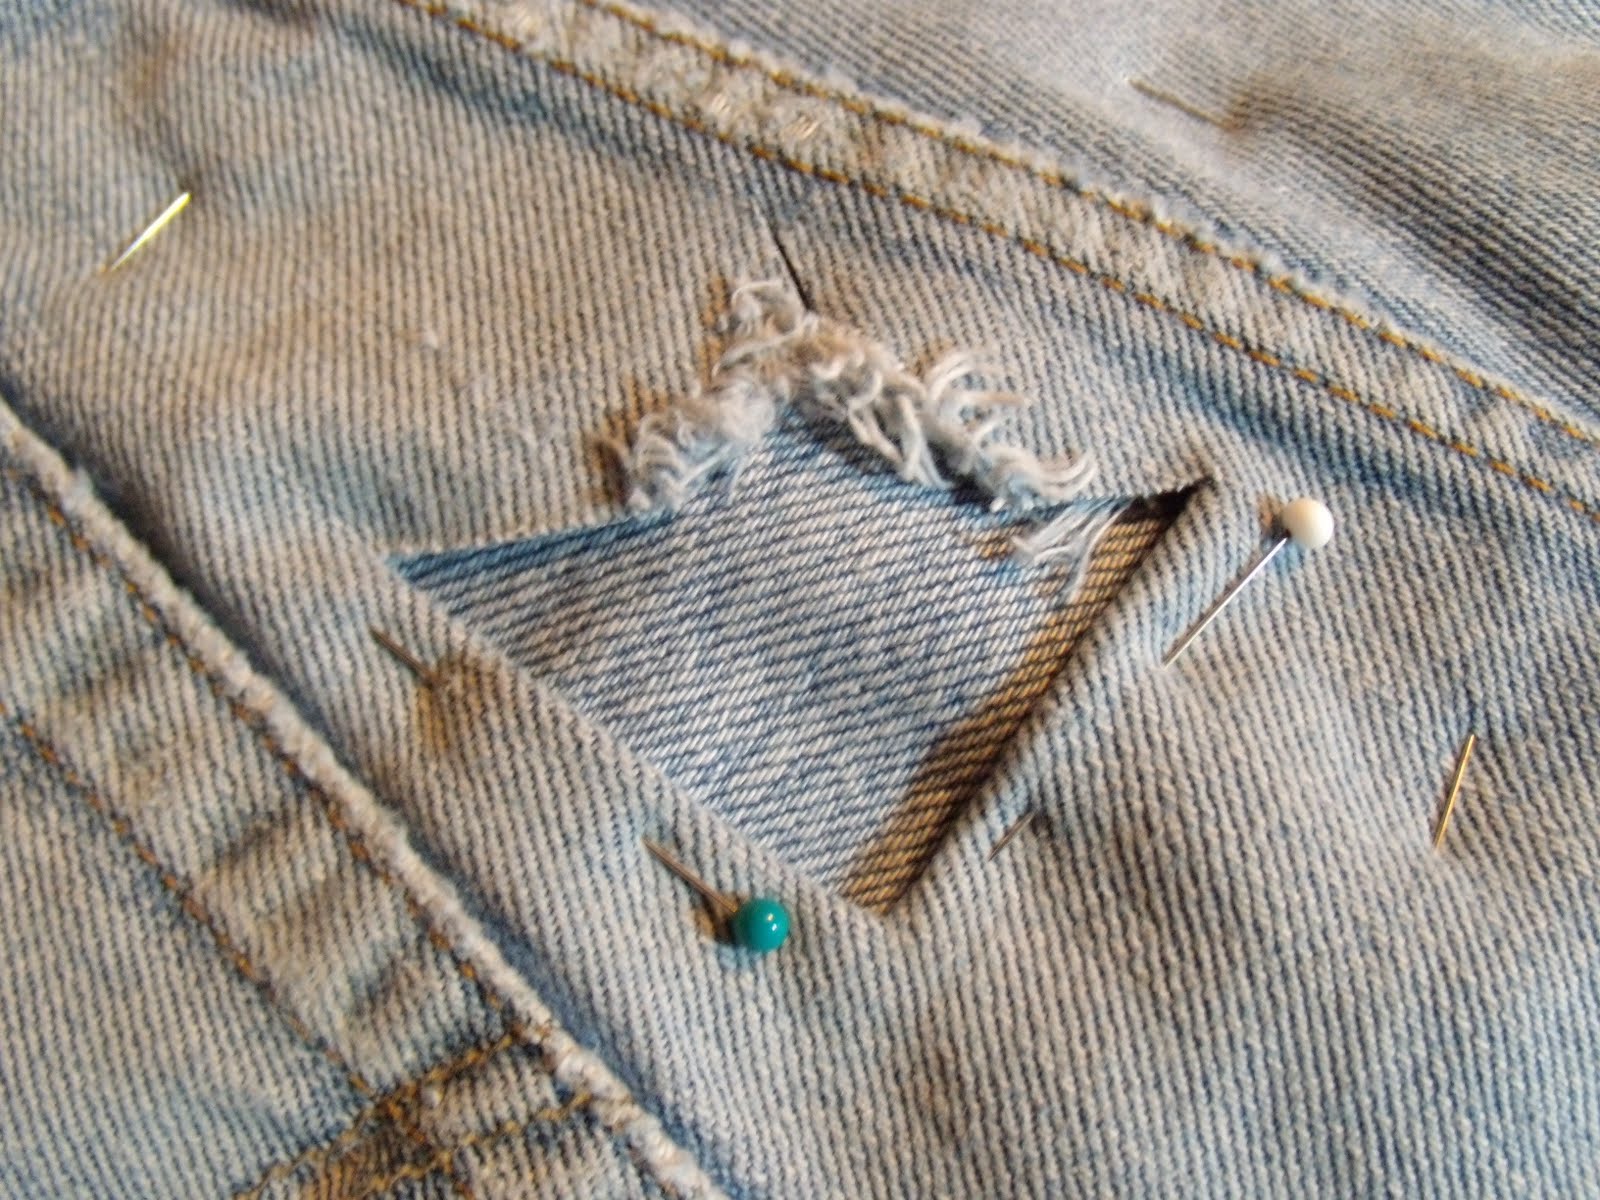 How to Repair a Hole in Clothes With Zigzag Stitch Techniques